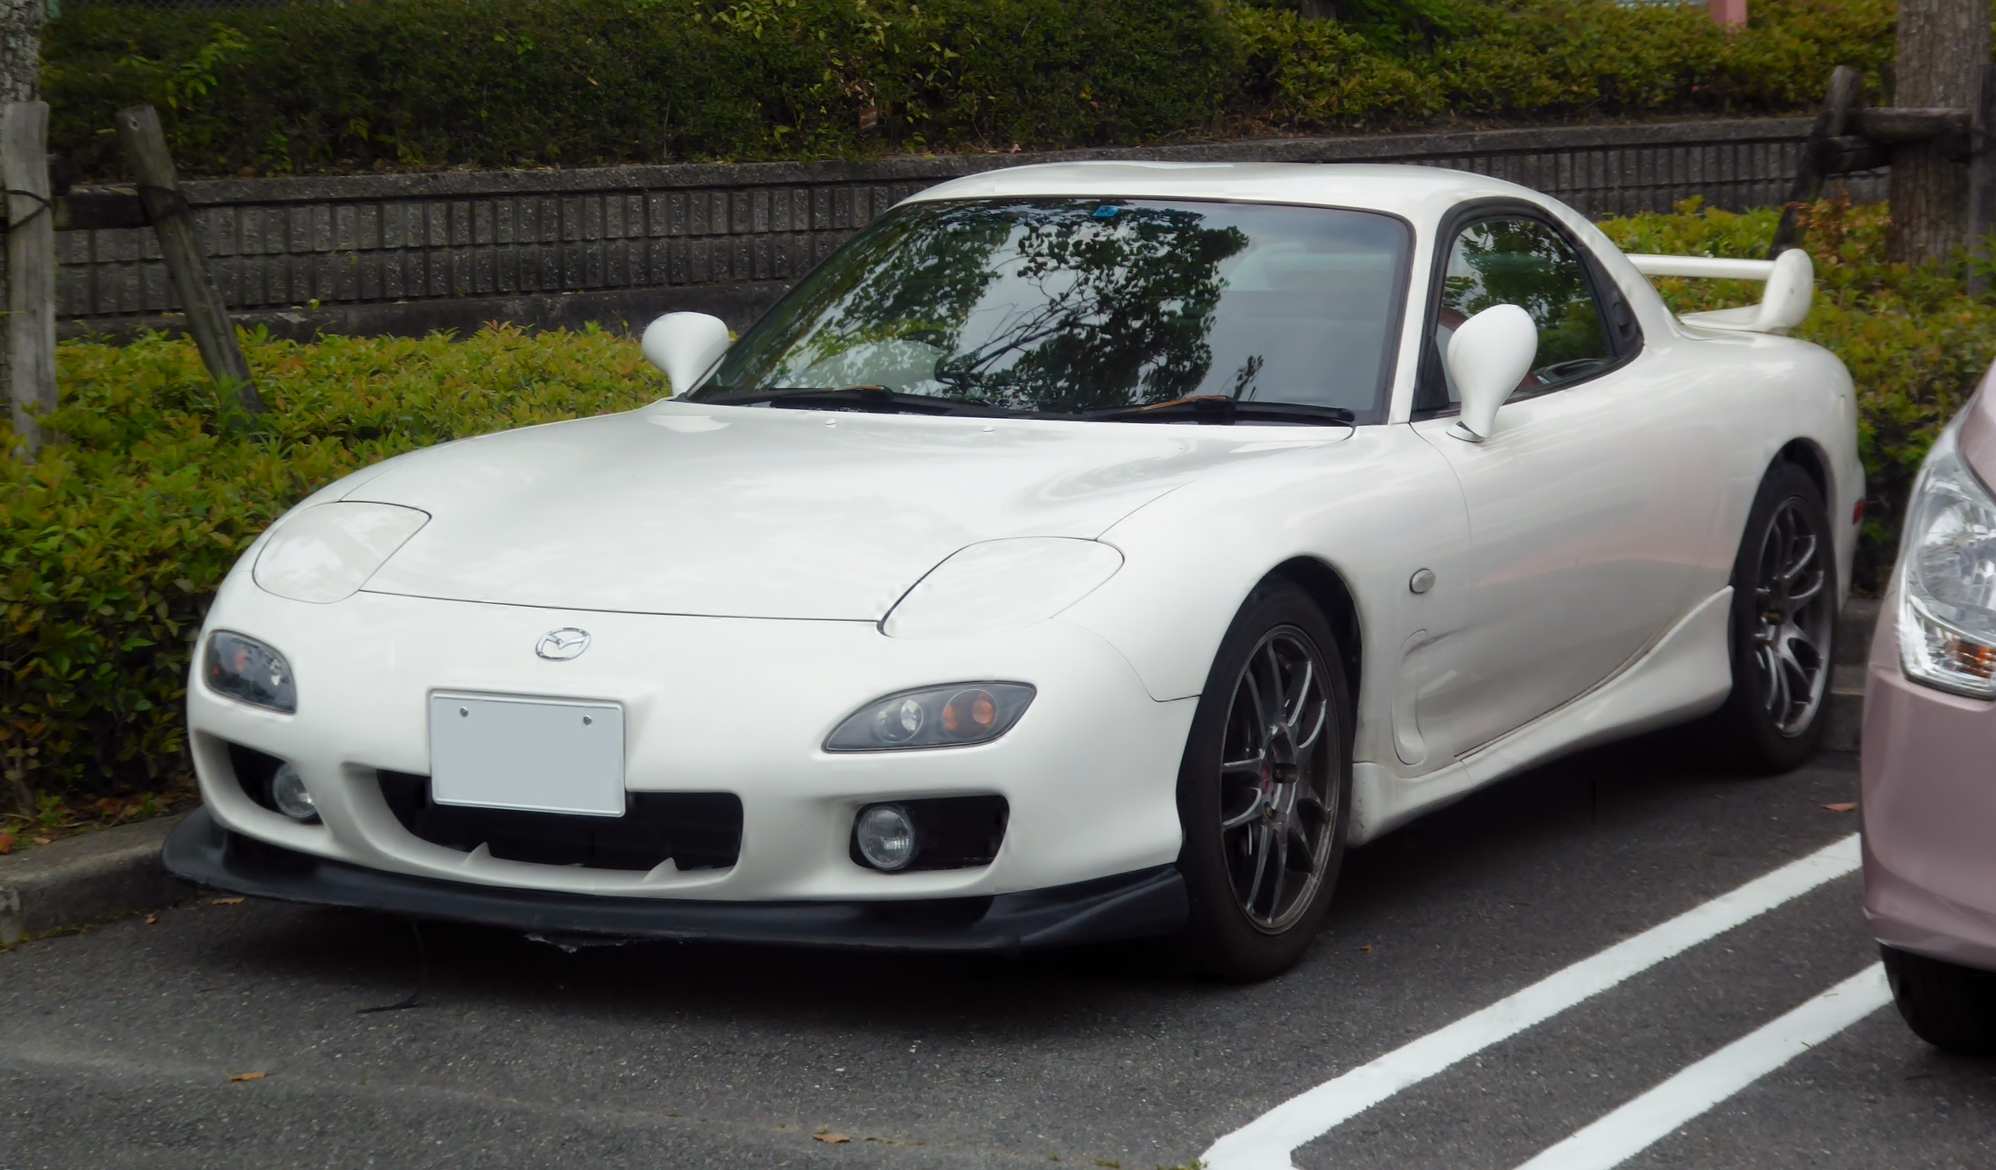 1994 - 1996 Mazda RX-7 - Want 94-96 rx-7 fd3s lhd - Used - Holmdel, NJ 07733, United States